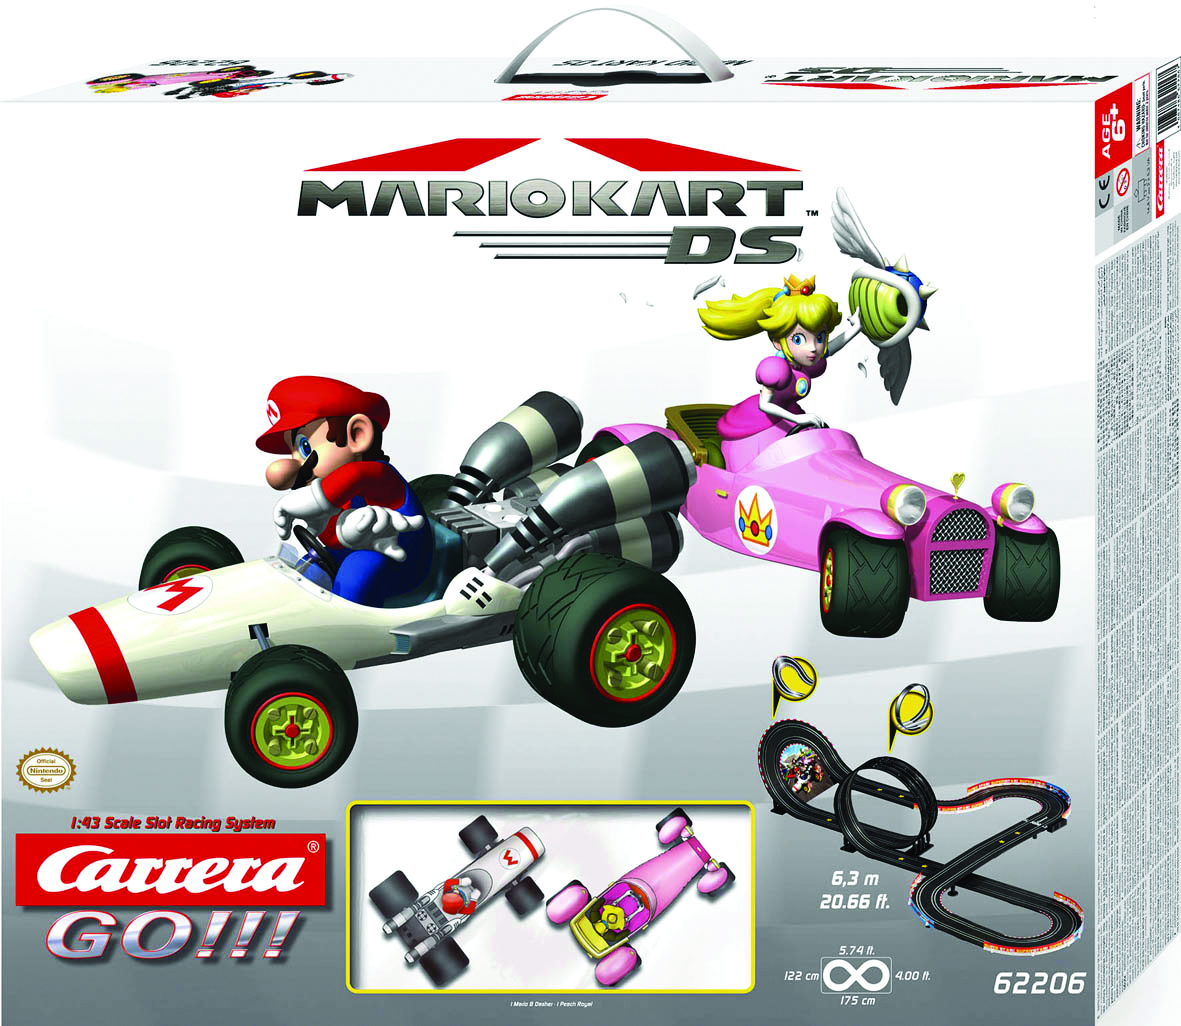 OCT101588 - MARIO KART DS 1/43 SCALE SLOT CAR SYSTEM - Previews World